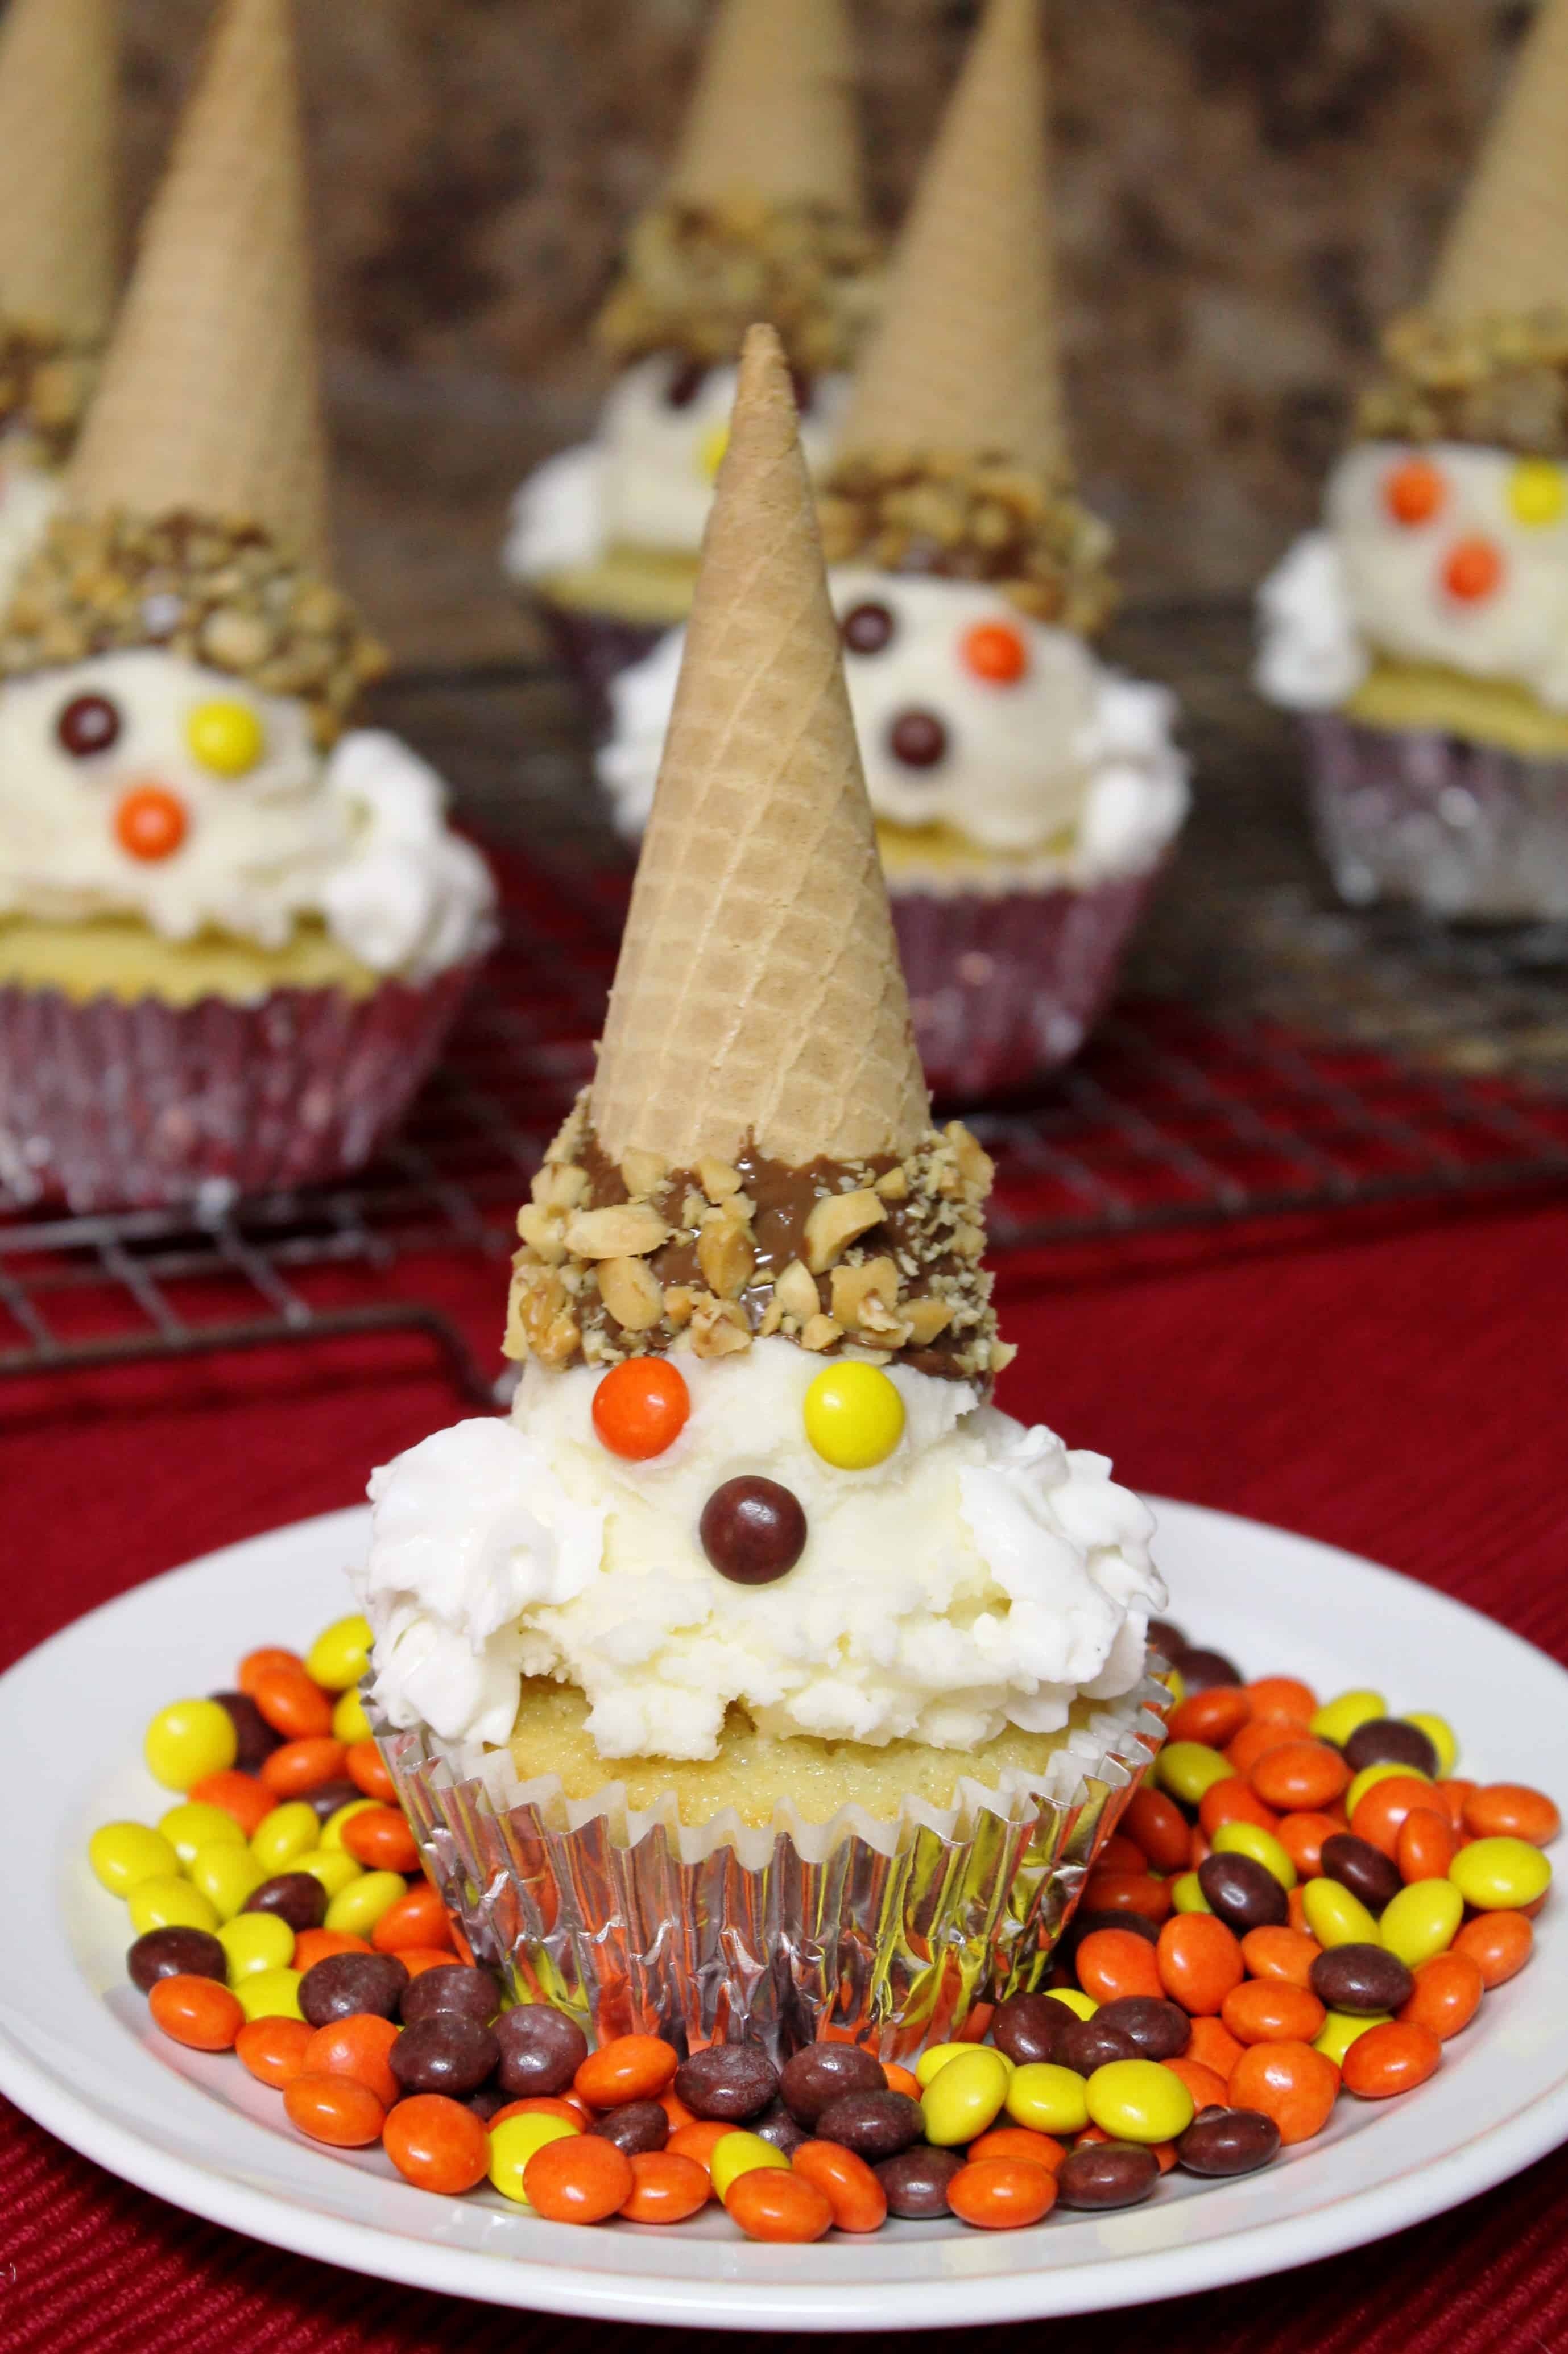 Cone Head Cupcakes with Ice Cream Frosting and Reese's Pieces